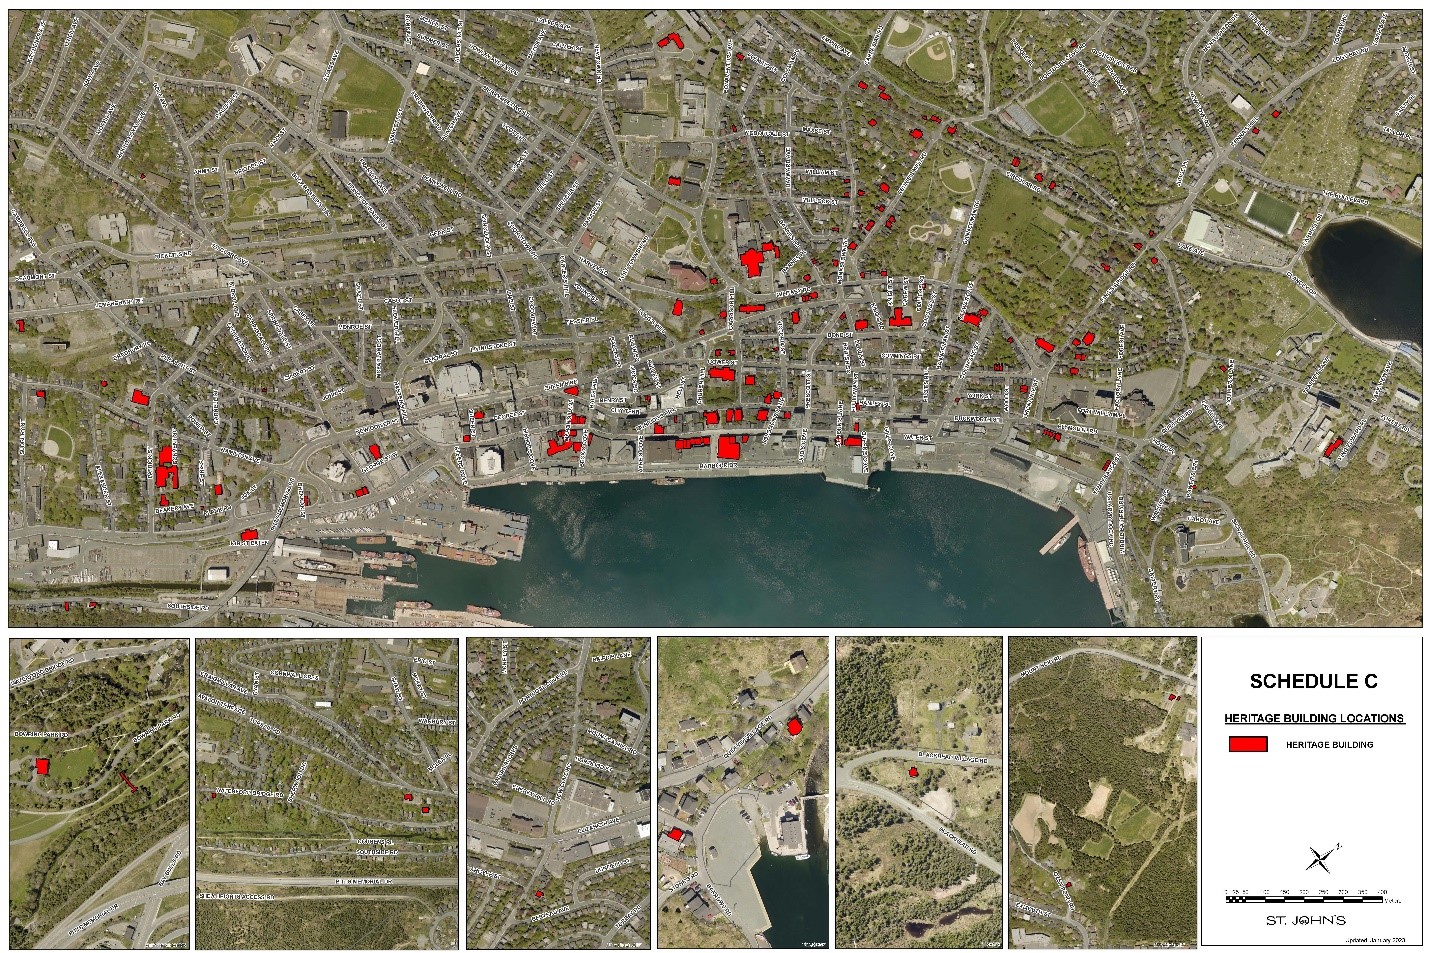 aerial map showing highlighted Heritage building locations in red